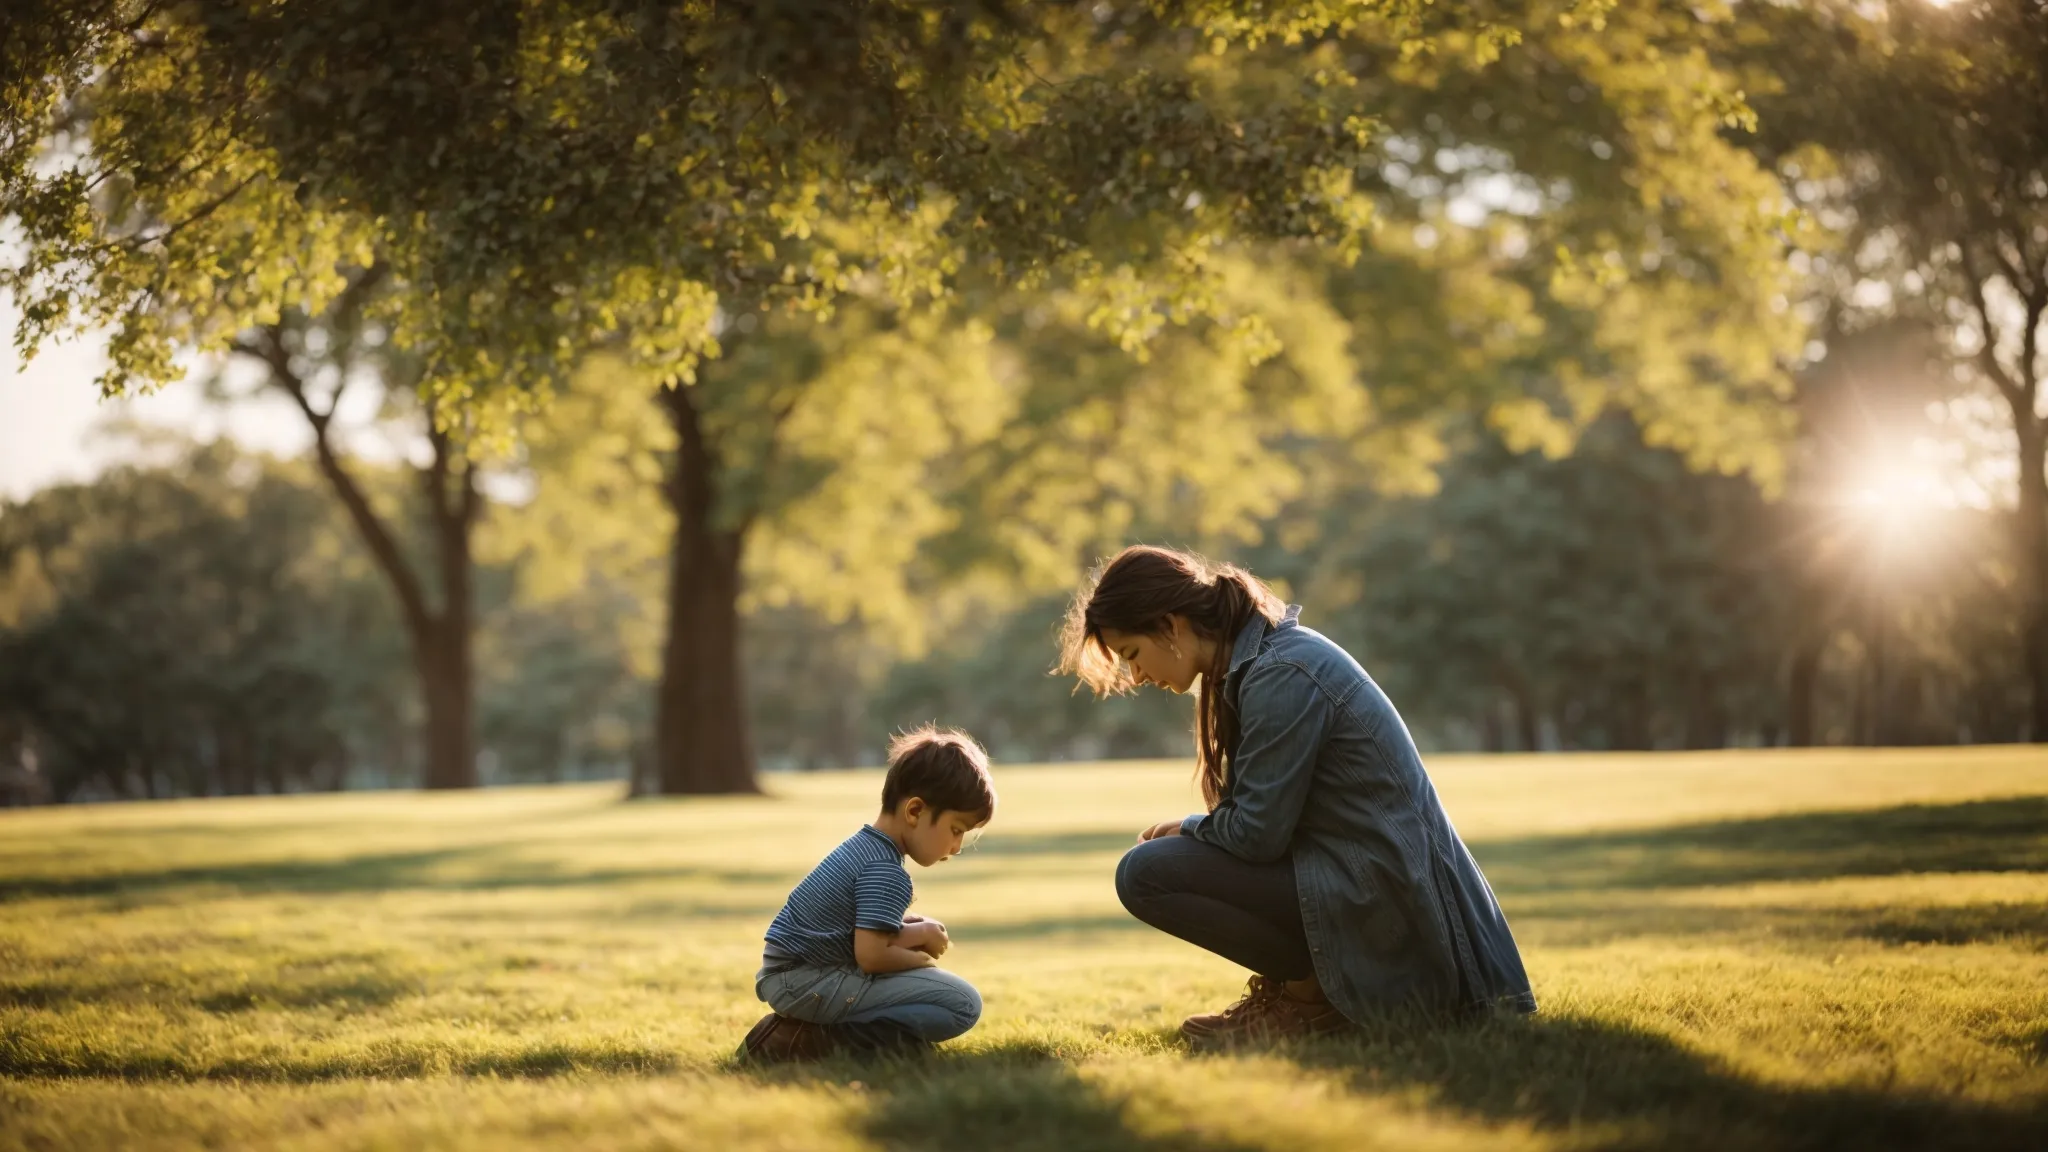 a parent kneeling down to eye level with their child, offering a comforting hug in a sunny park.